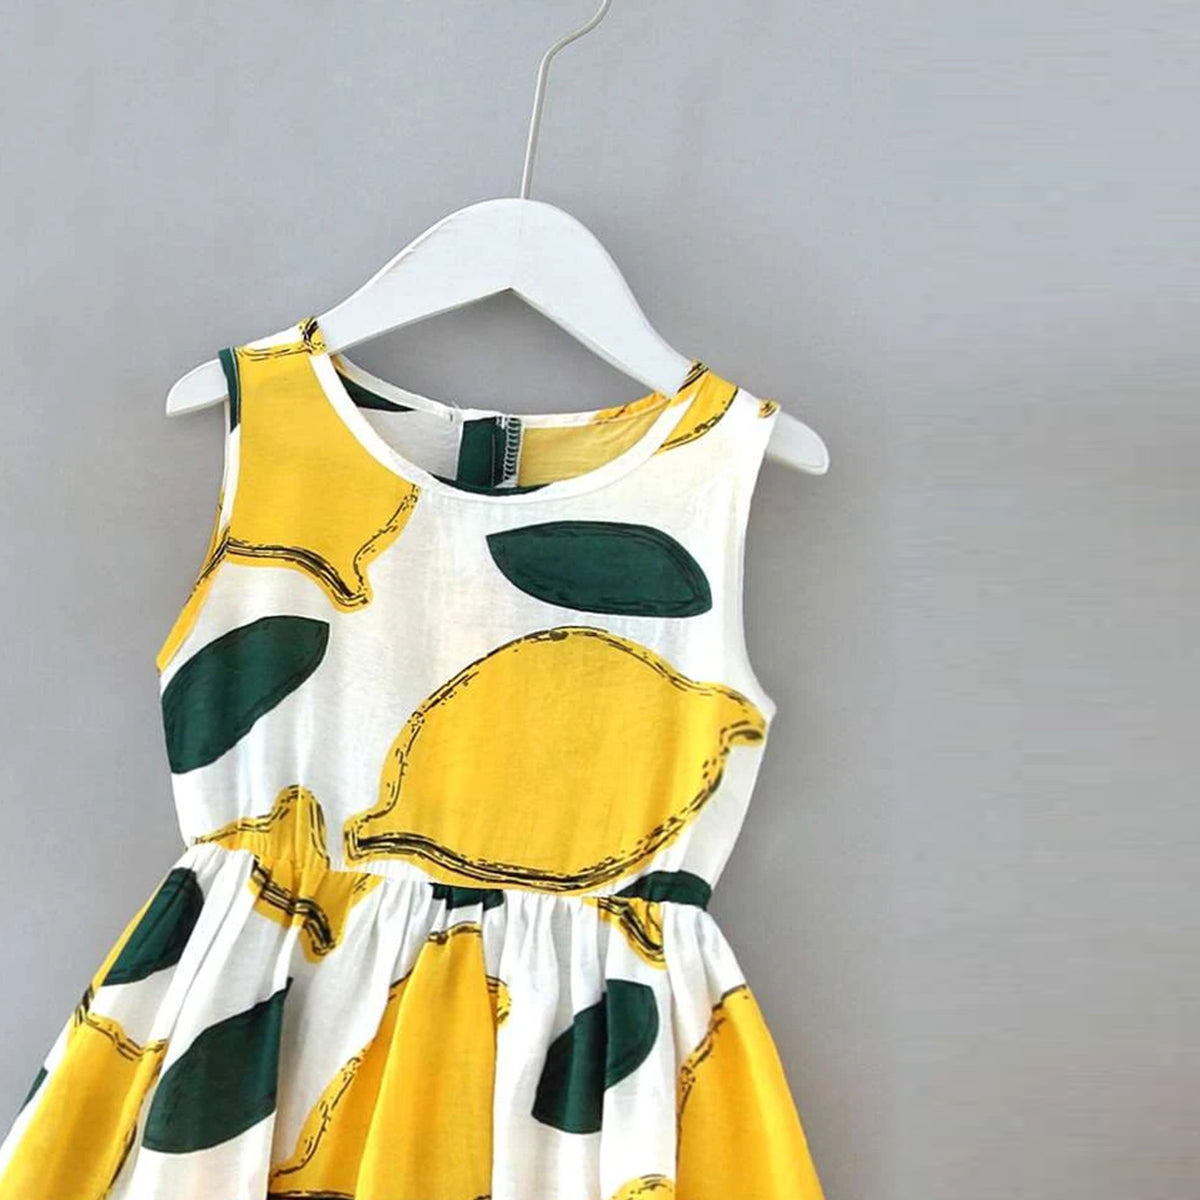 Kids New Fashion Yellow_Green Frock & Dresses for Baby Girls.